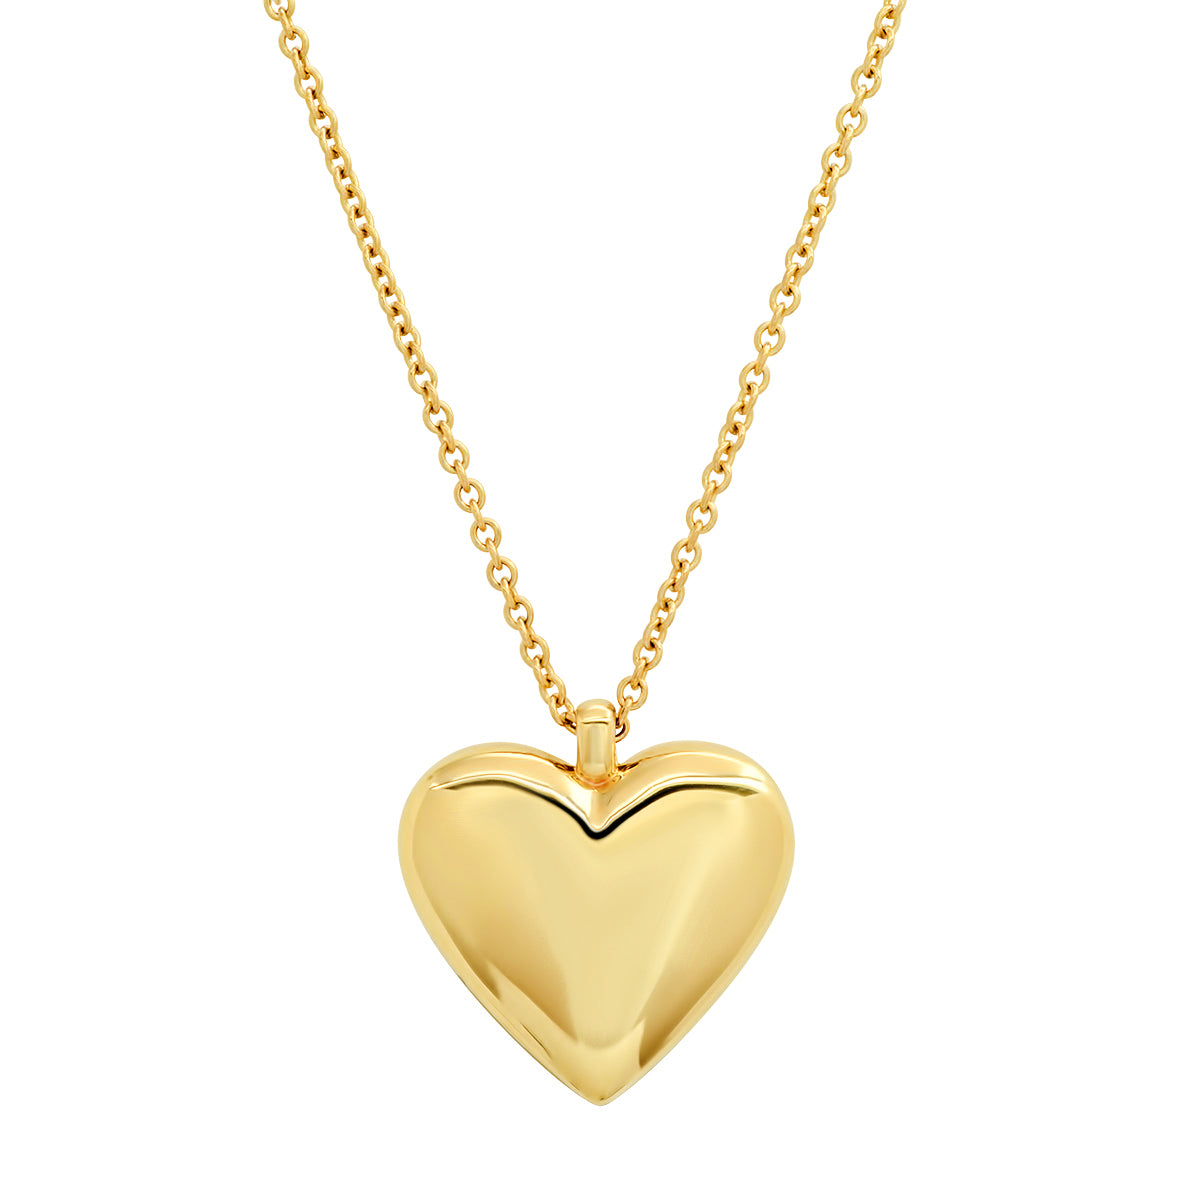 Large Hammered 14K Gold Heart Pendant - Apples of Gold Jewelry